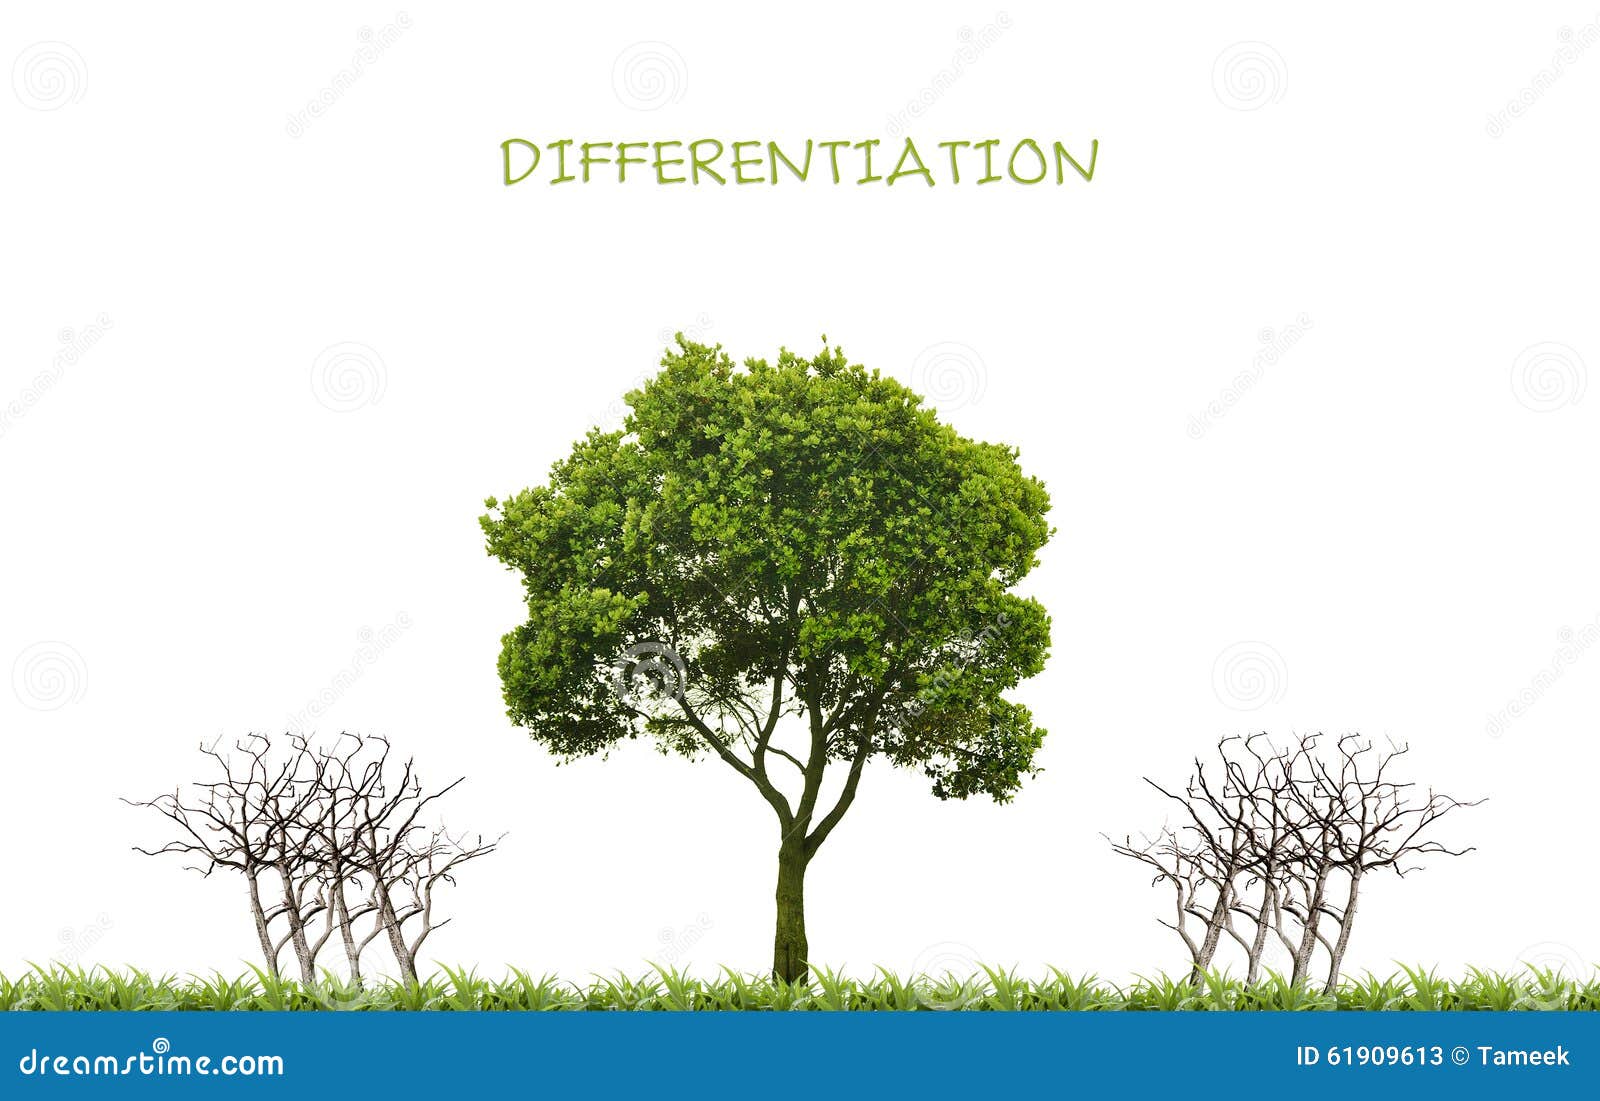 business, differentiation concept